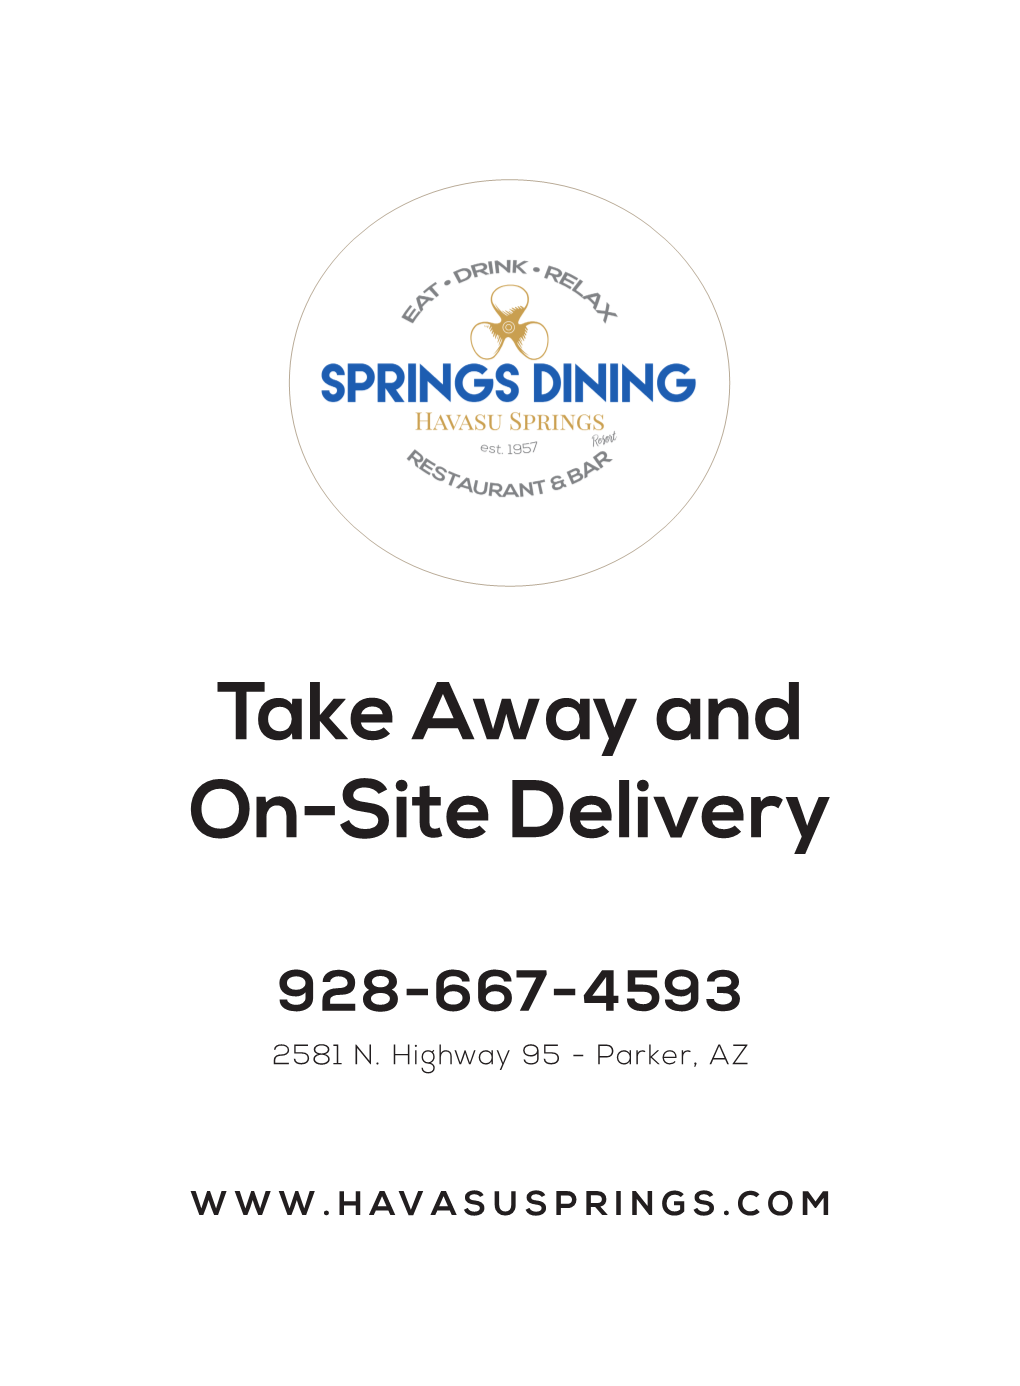 Take Away and On-Site Delivery